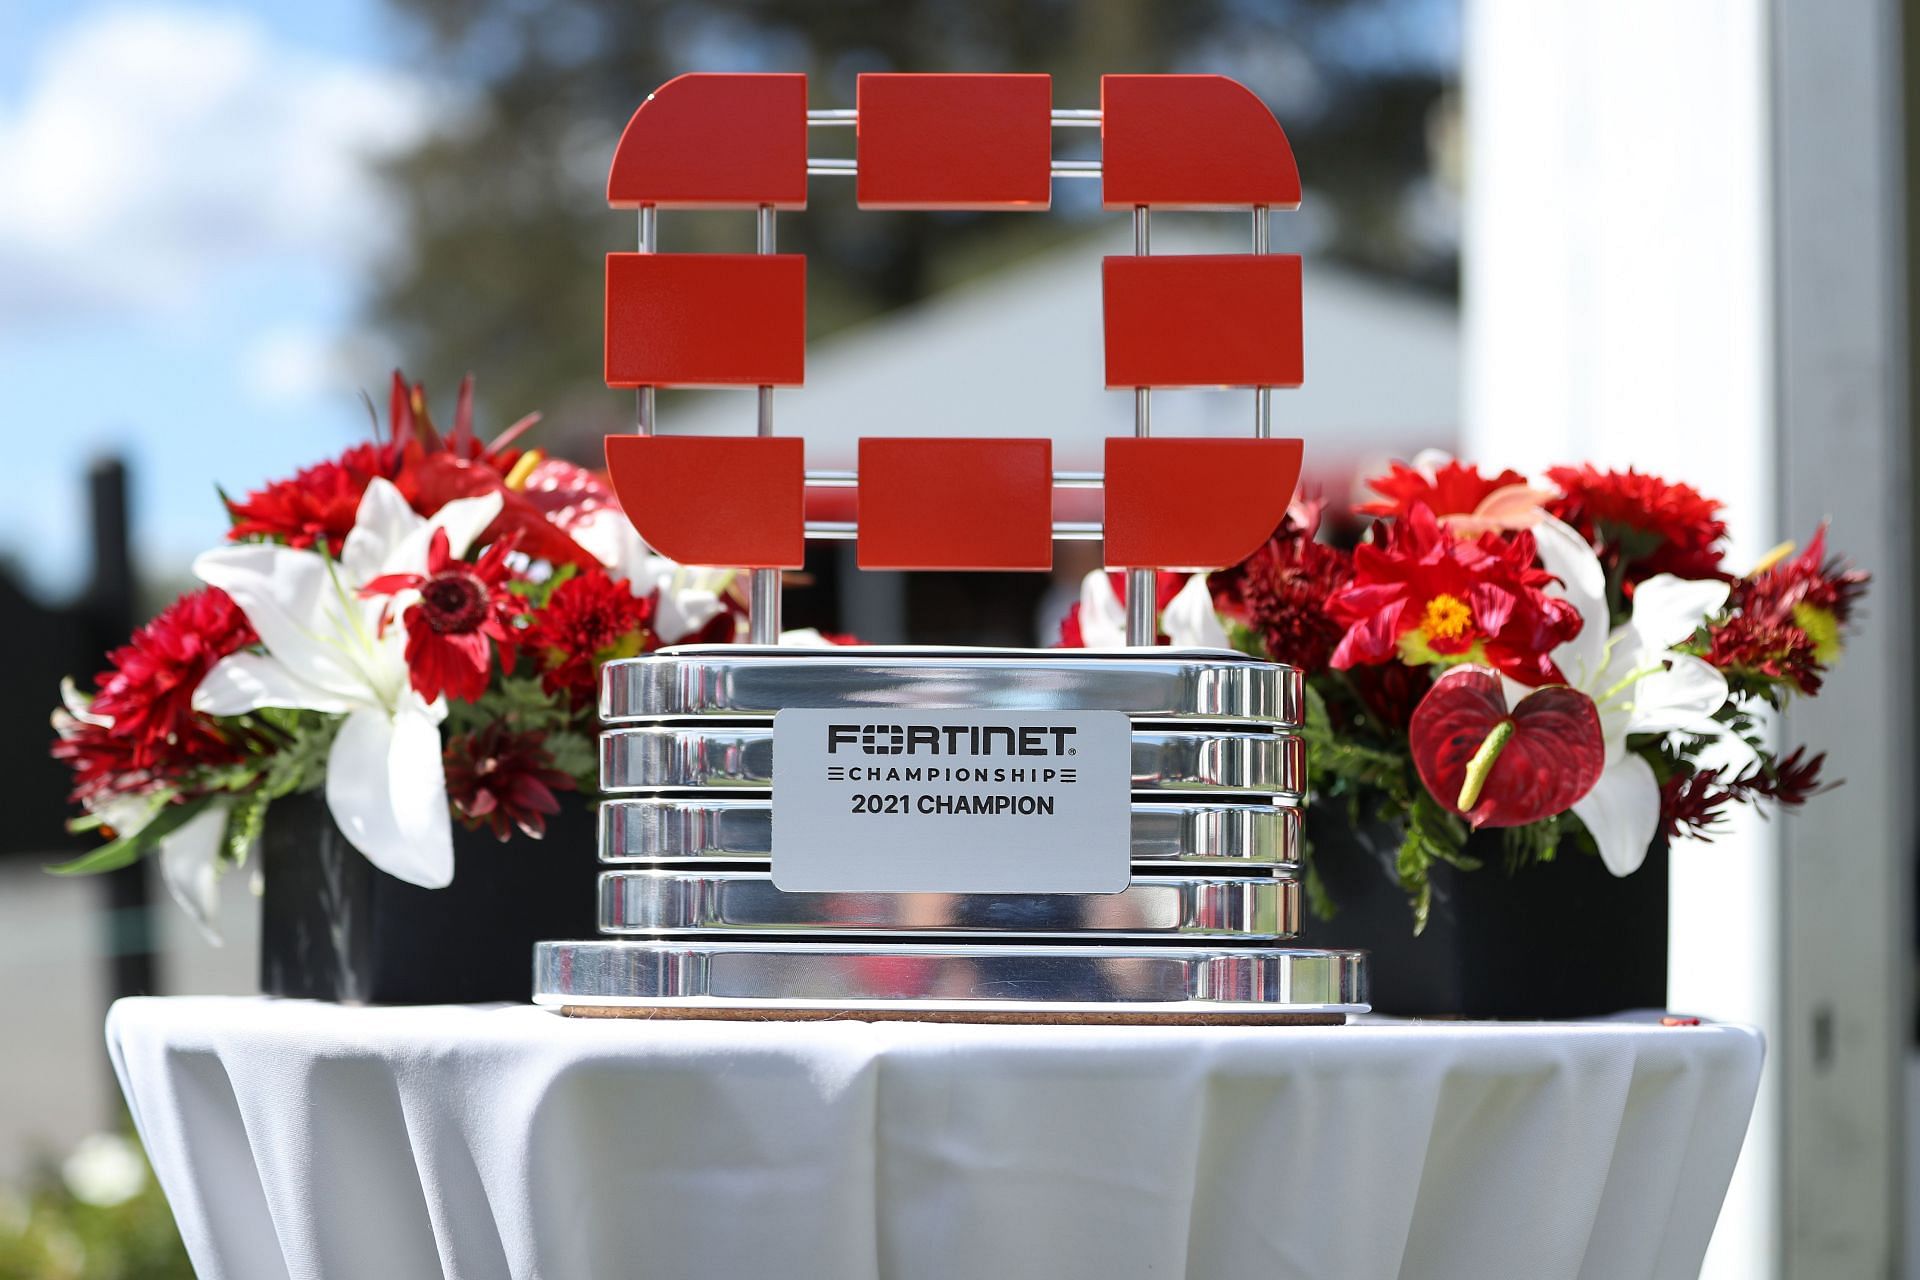 Fortinet Championship 2023: Winner's Payout & Prize Money Earnings